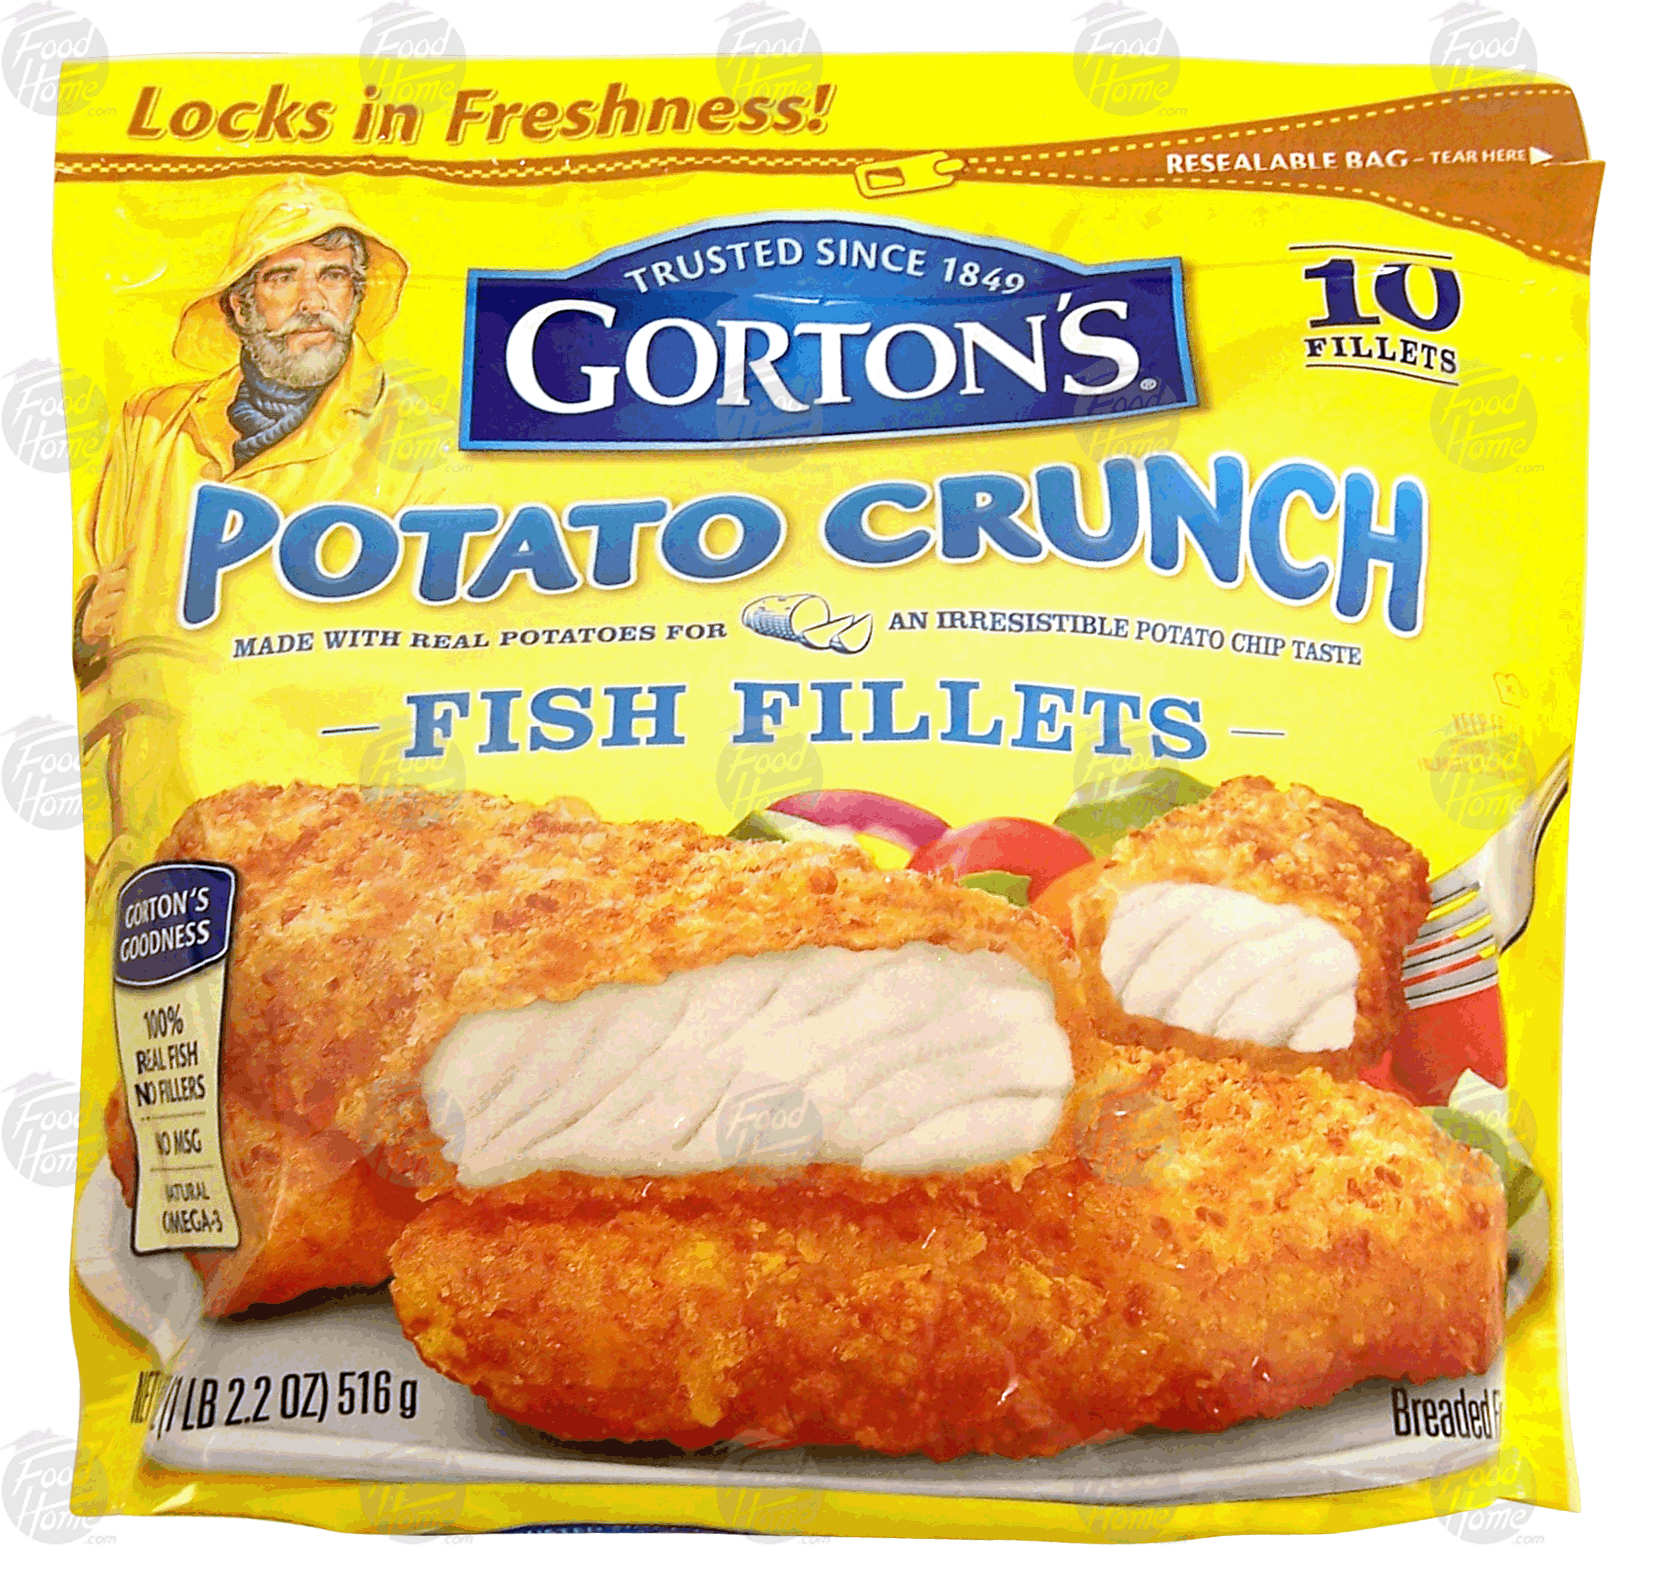 Product Infomation for Gorton's